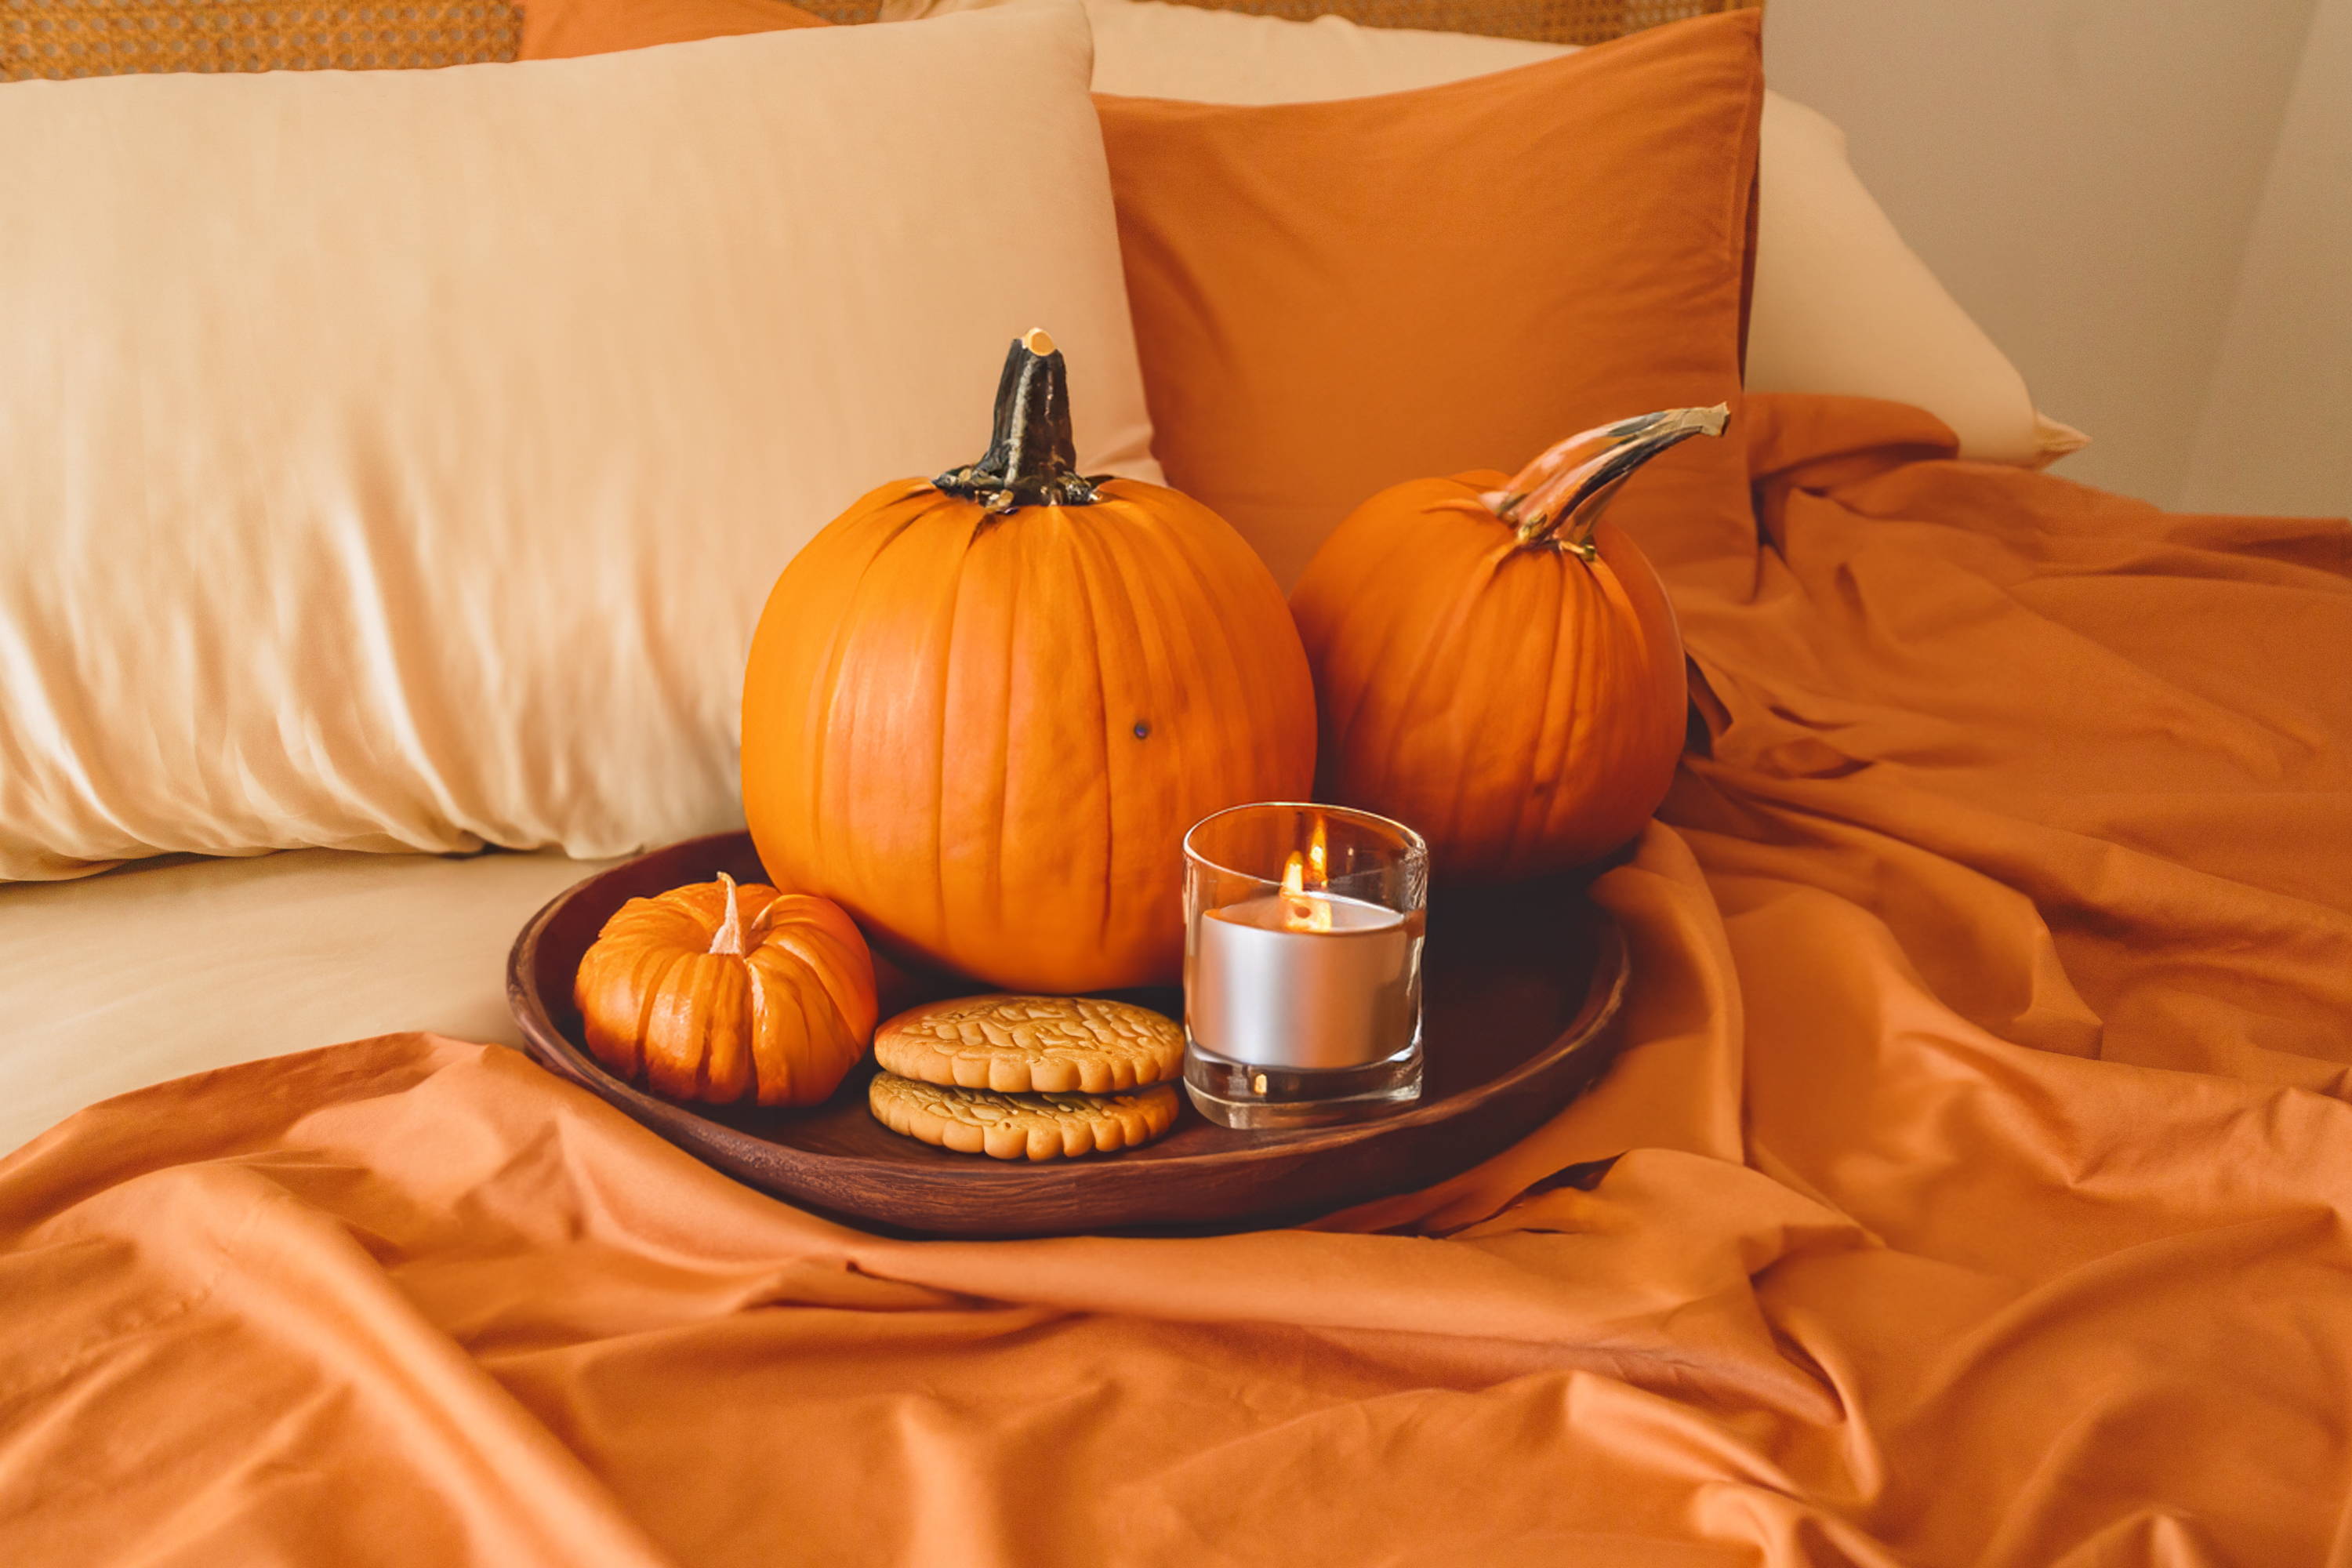 A tray of pumpkins and fall decor rest on top of the sateen organic cotton sheet set in terracotta